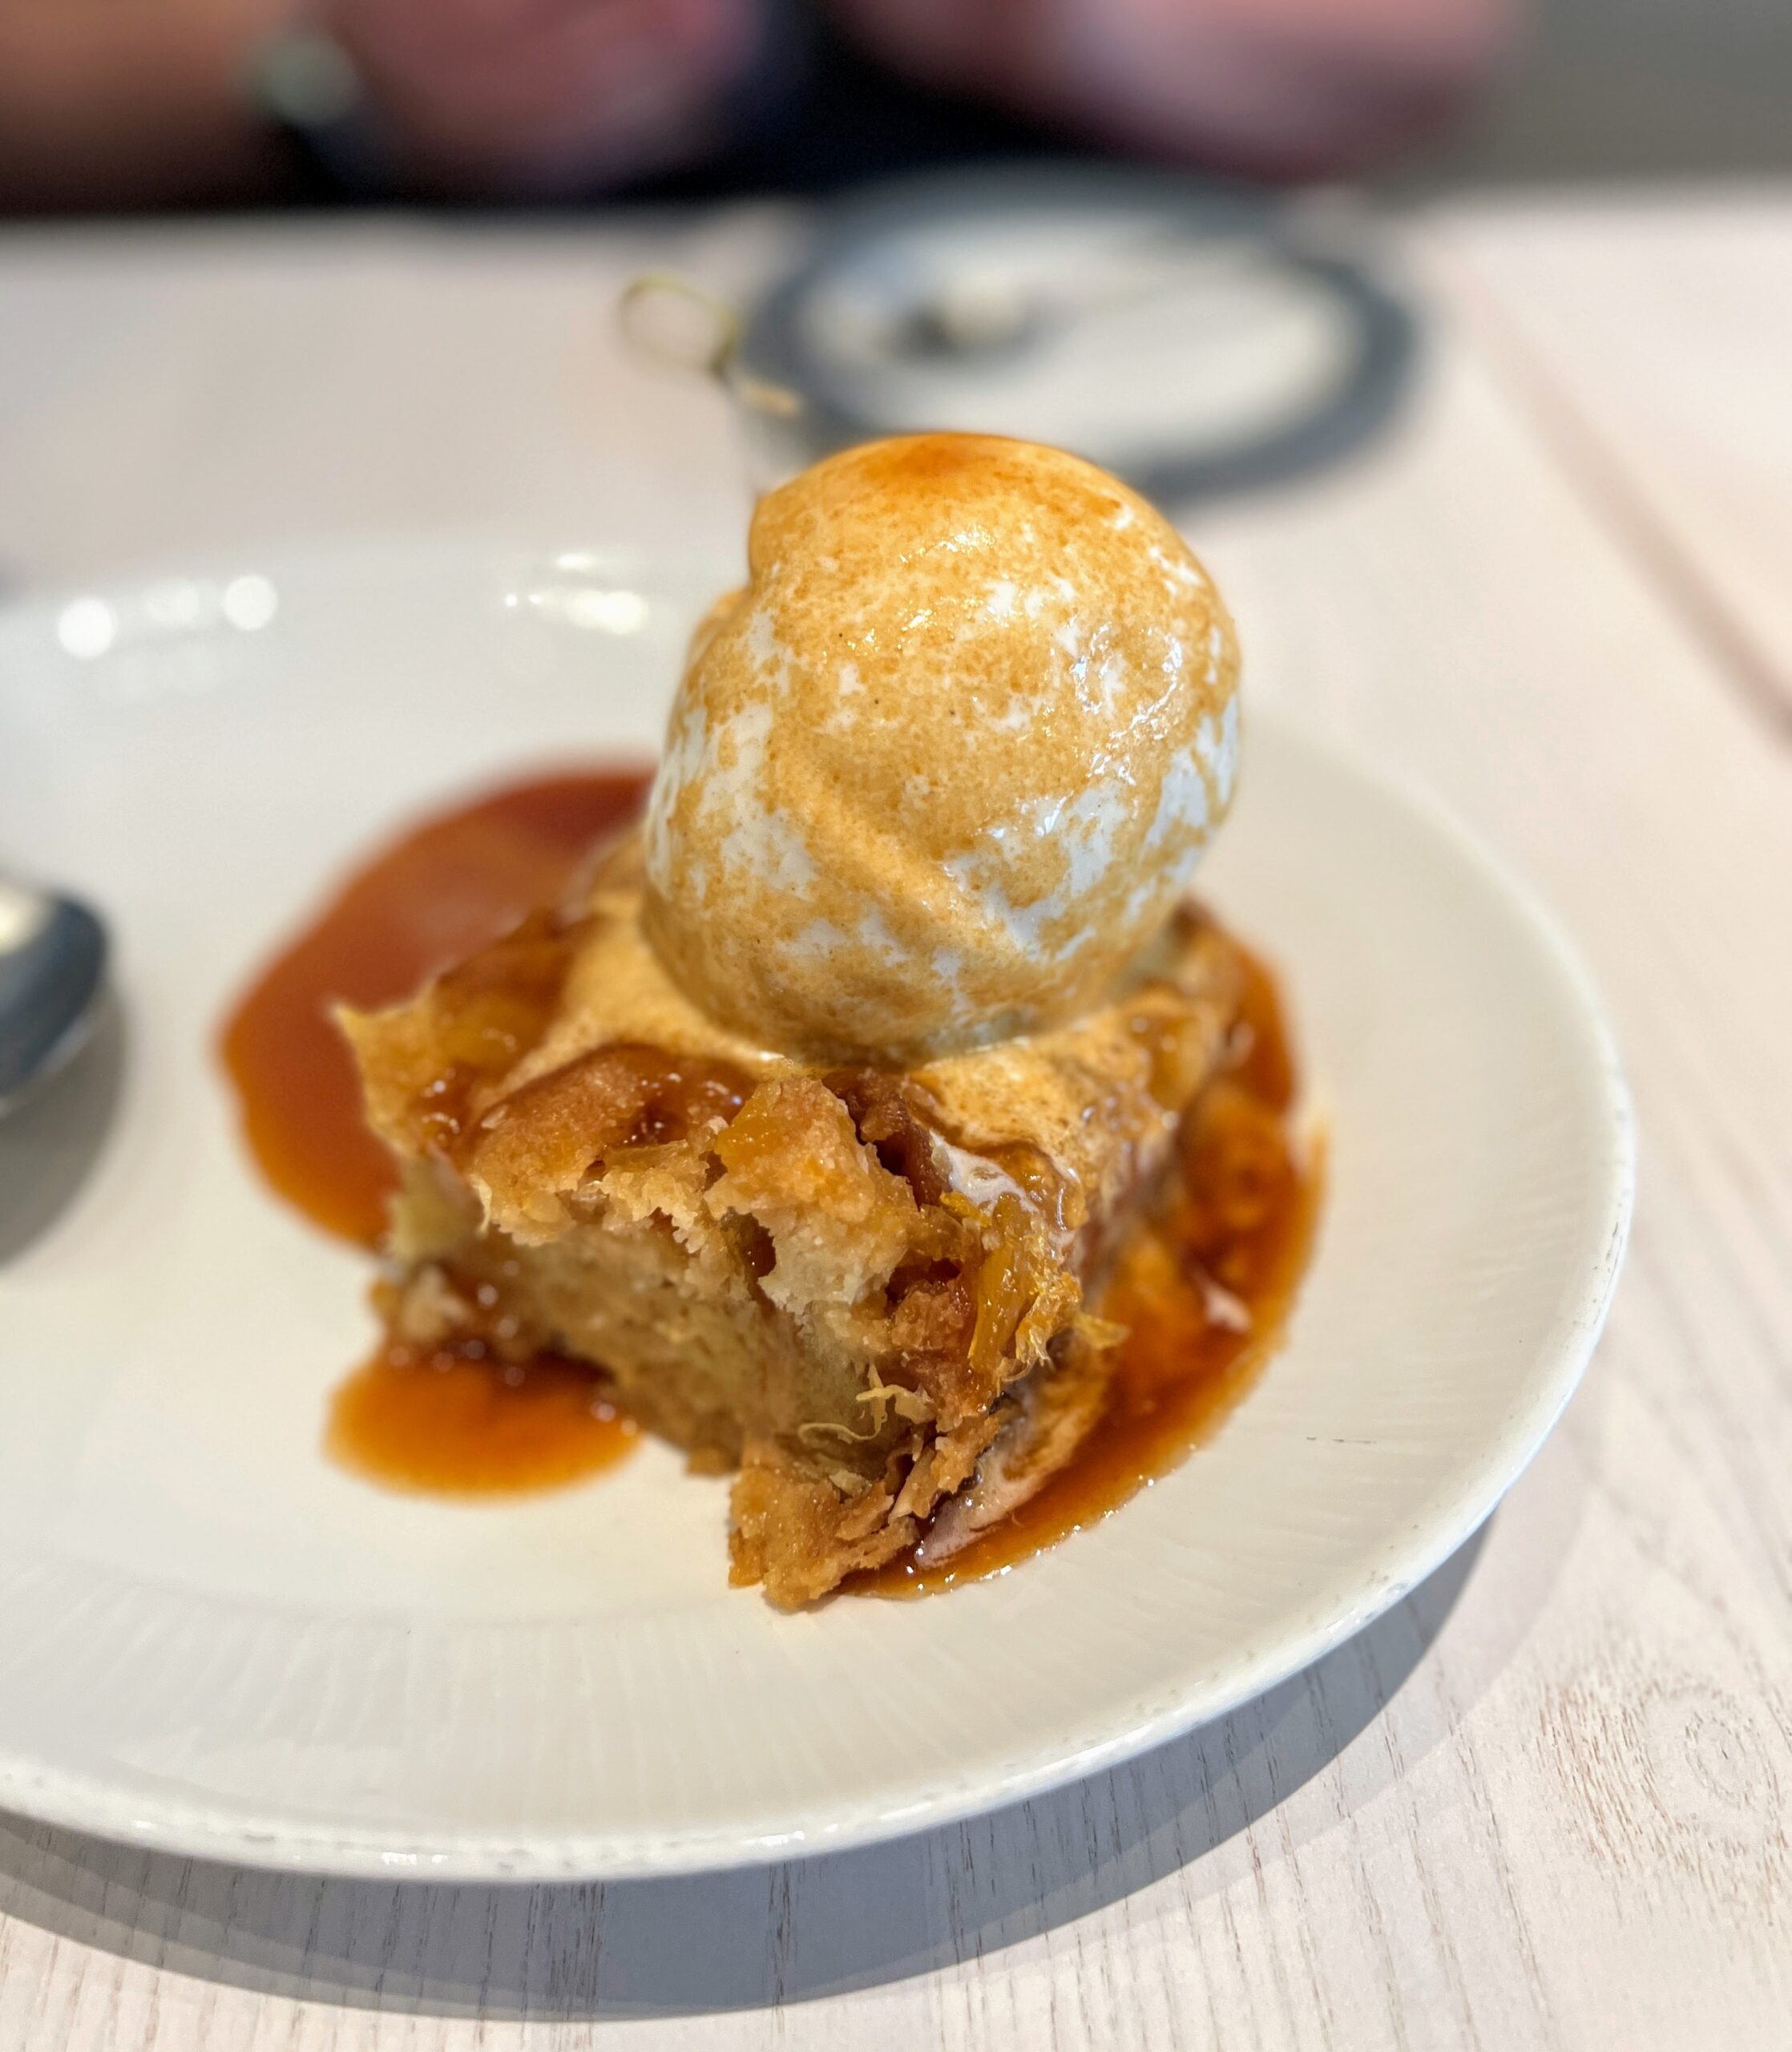 bread pudding sebastians bistro. book your disney dining reservations at 60 days in advance.